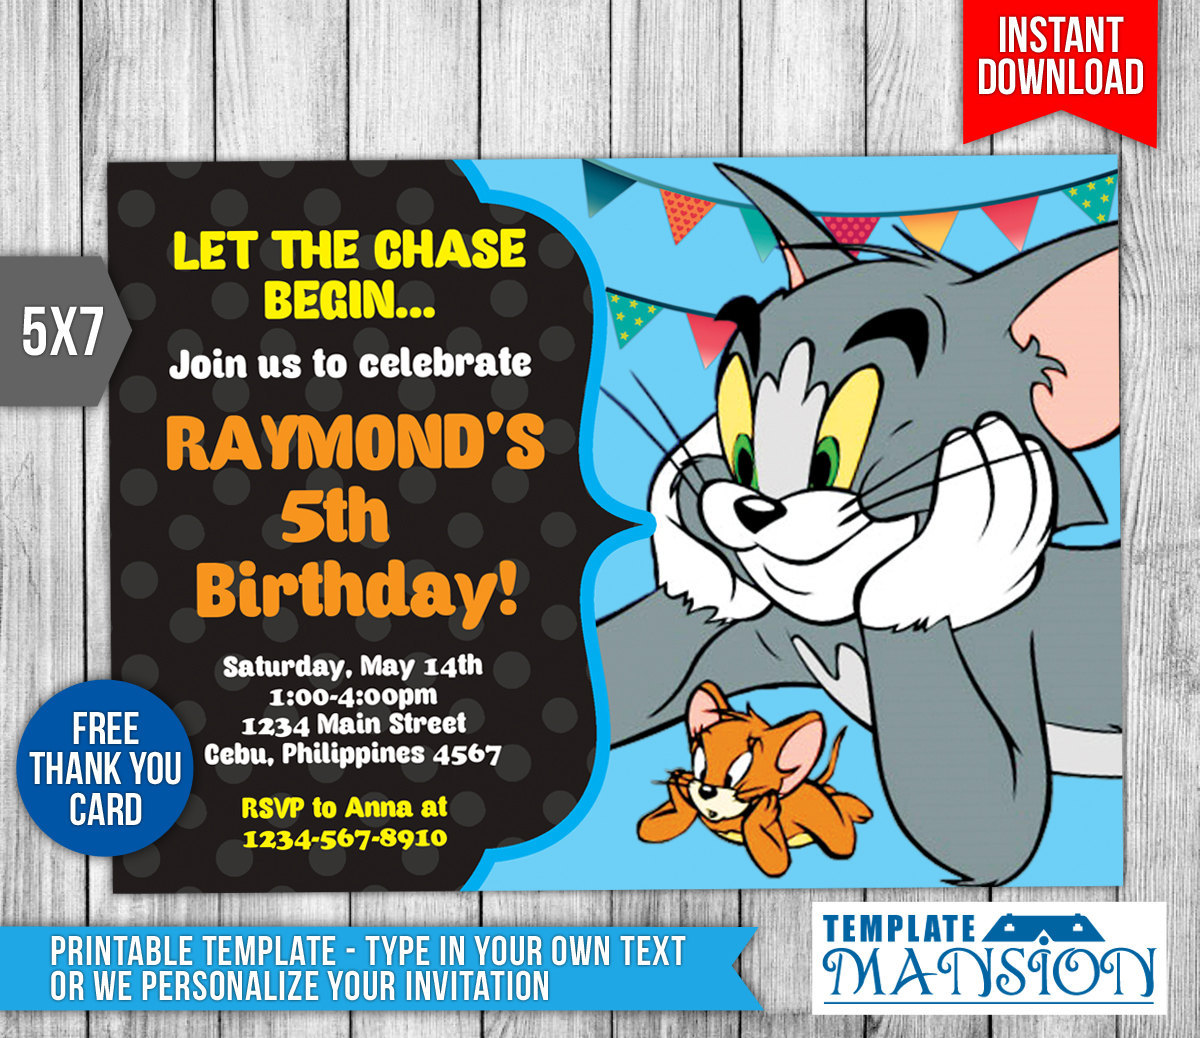 Personalized and Printable Tom and Jerry Invitation E-Card